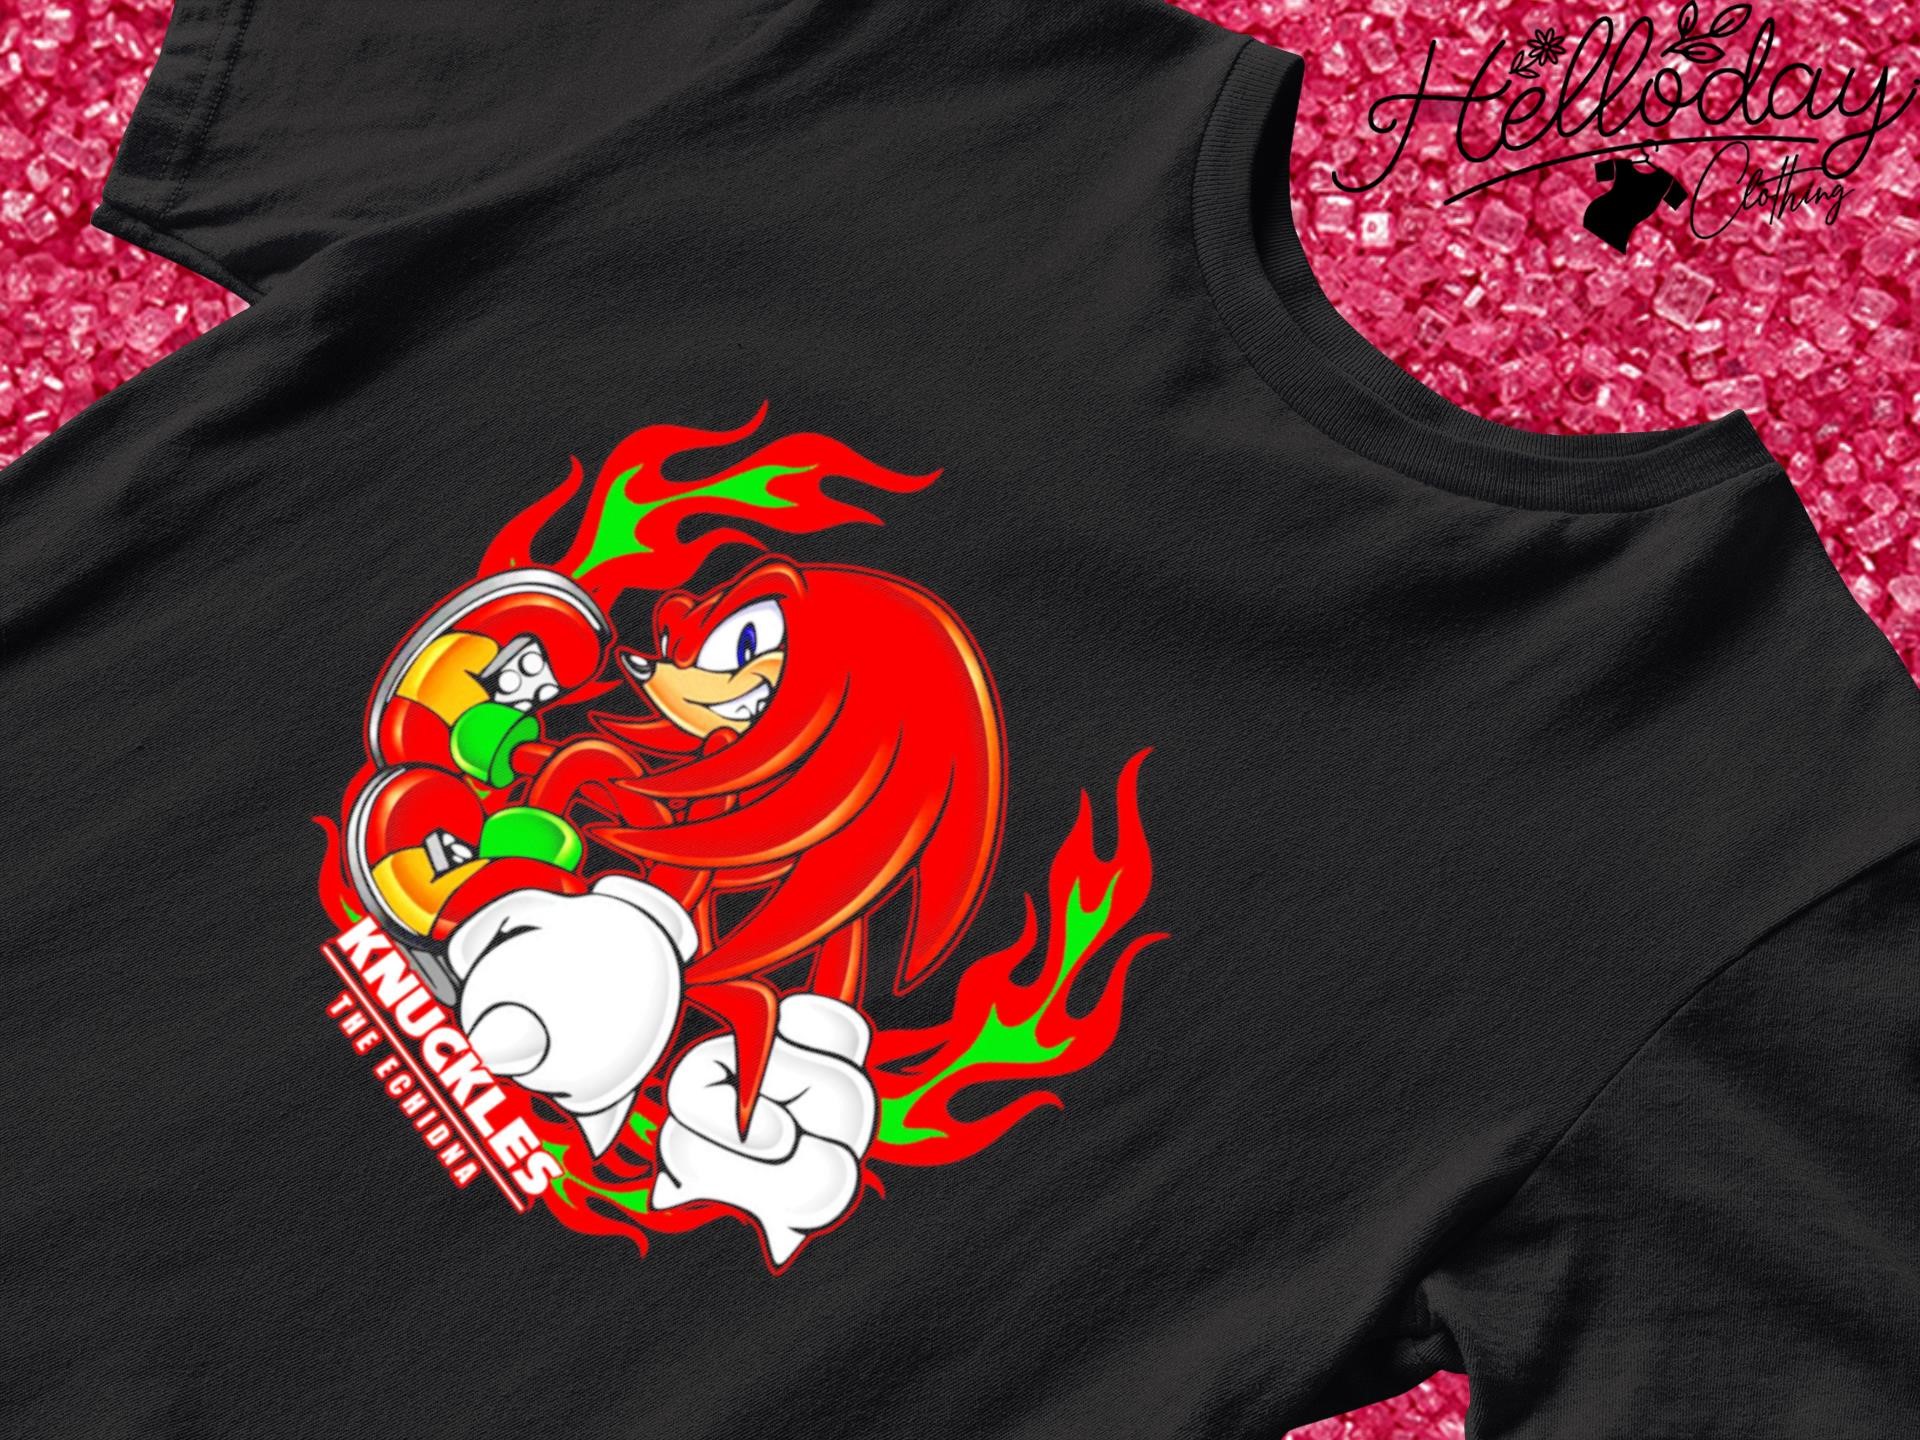 Knuckles the echidna power flame shirt